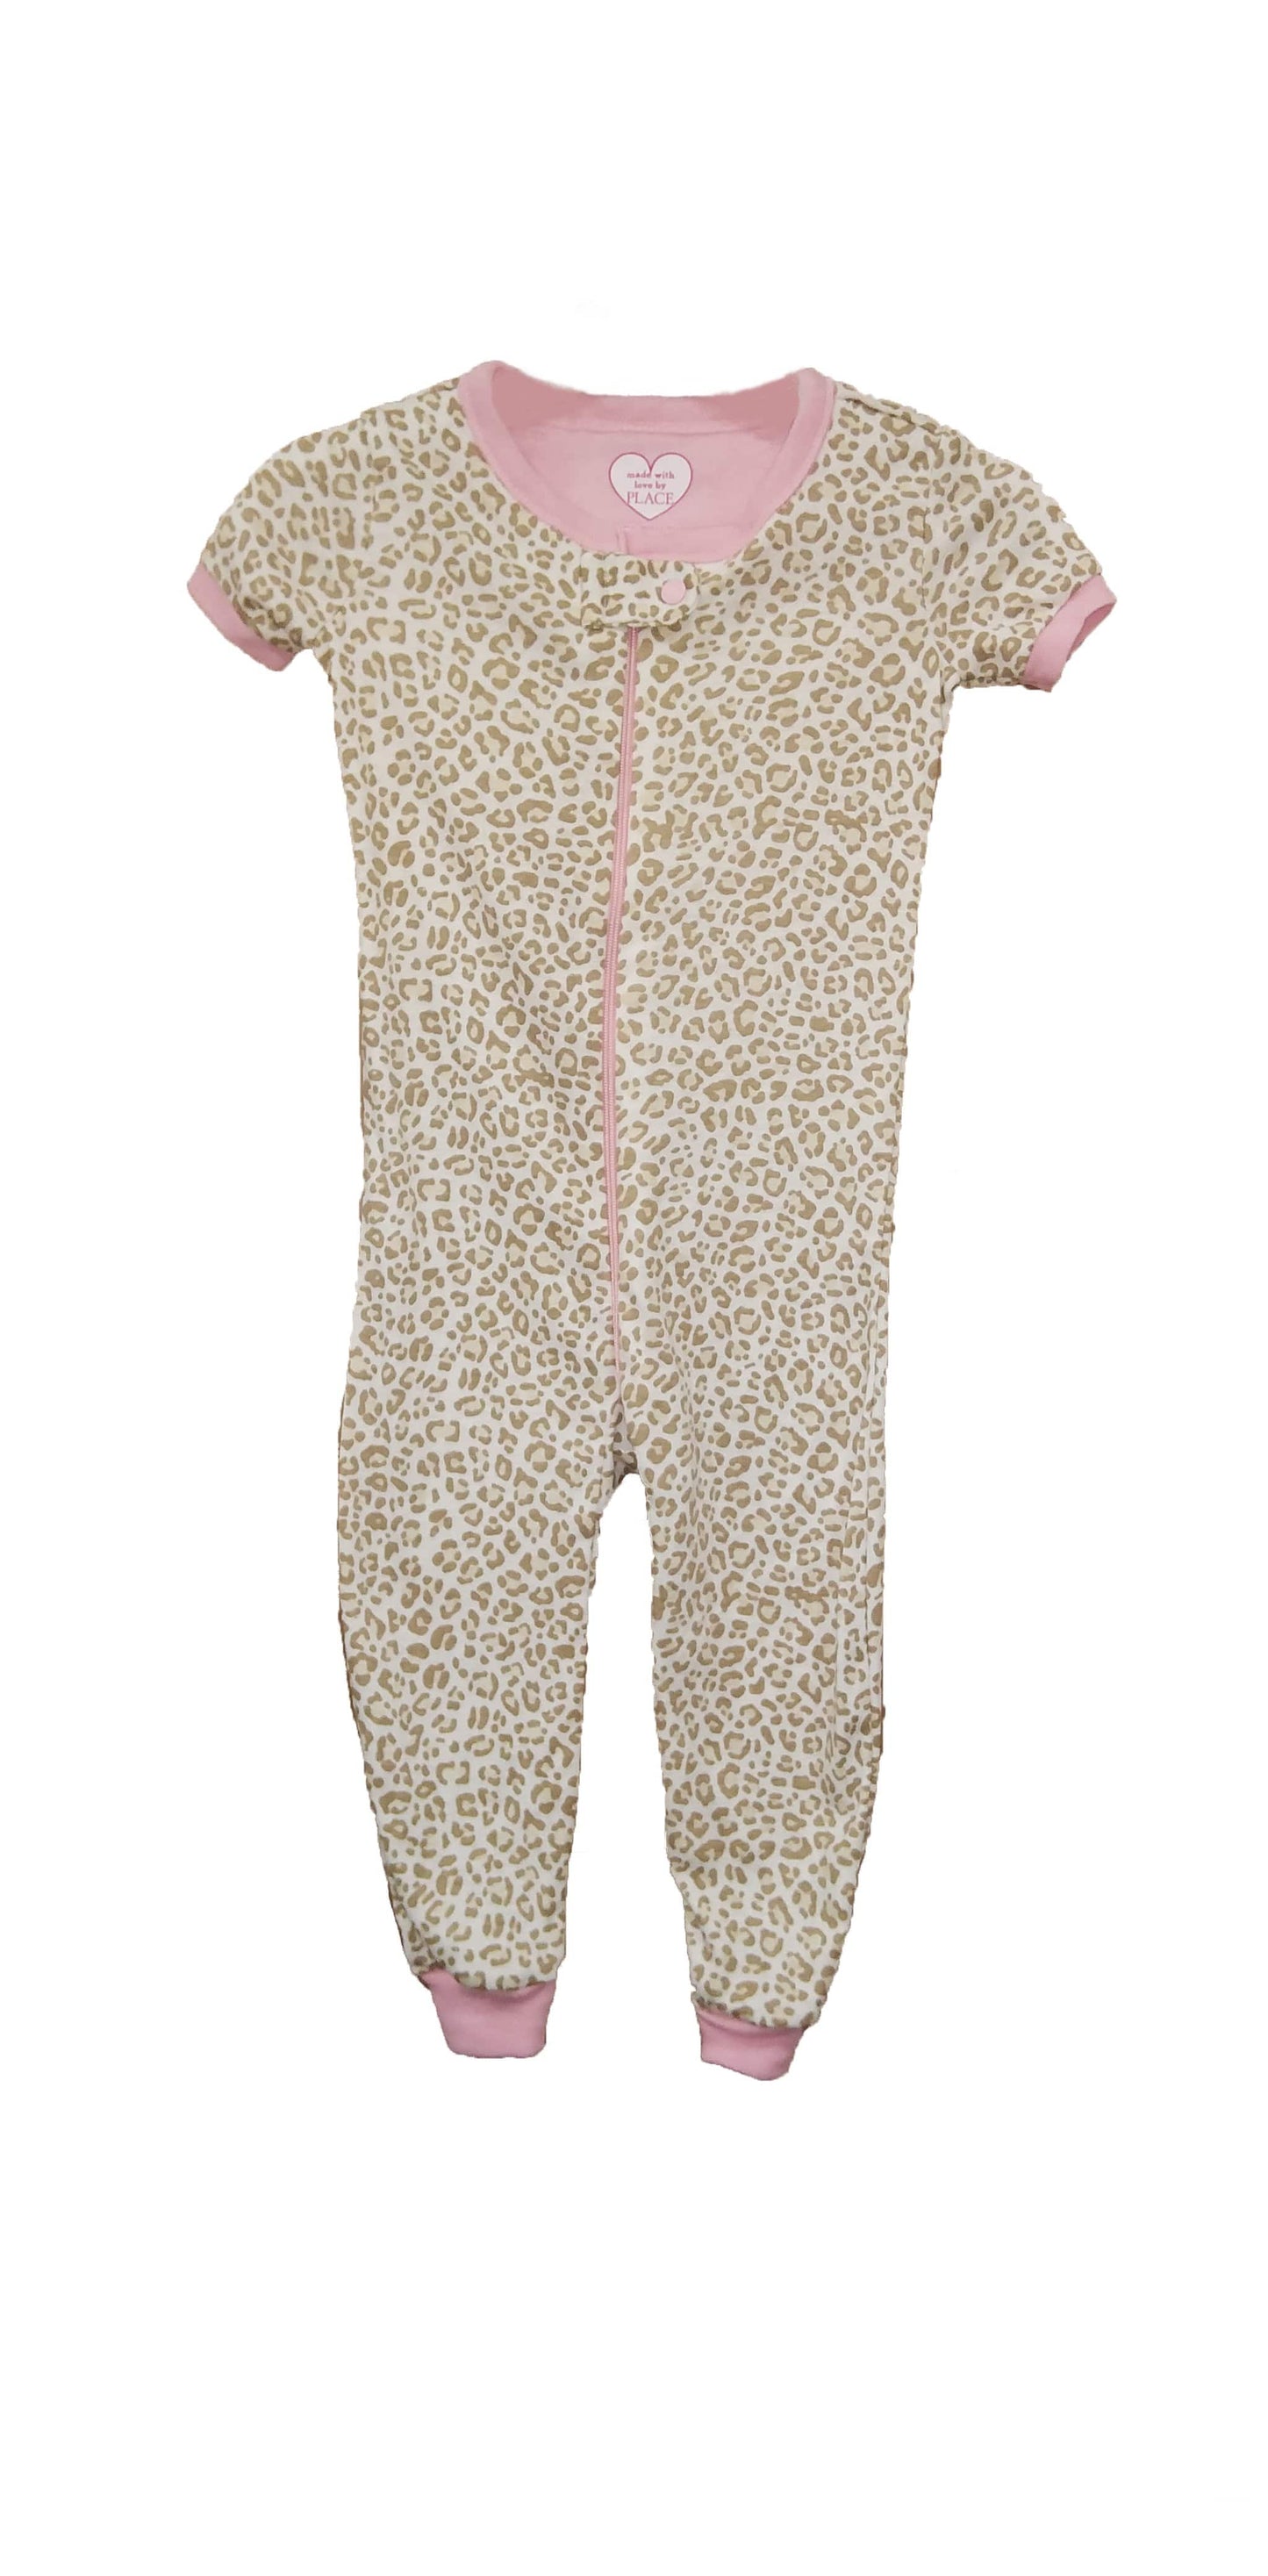 NEXT Baby Girl 12-18 Month NEXT - Baby Girl Leopard Printed Romper